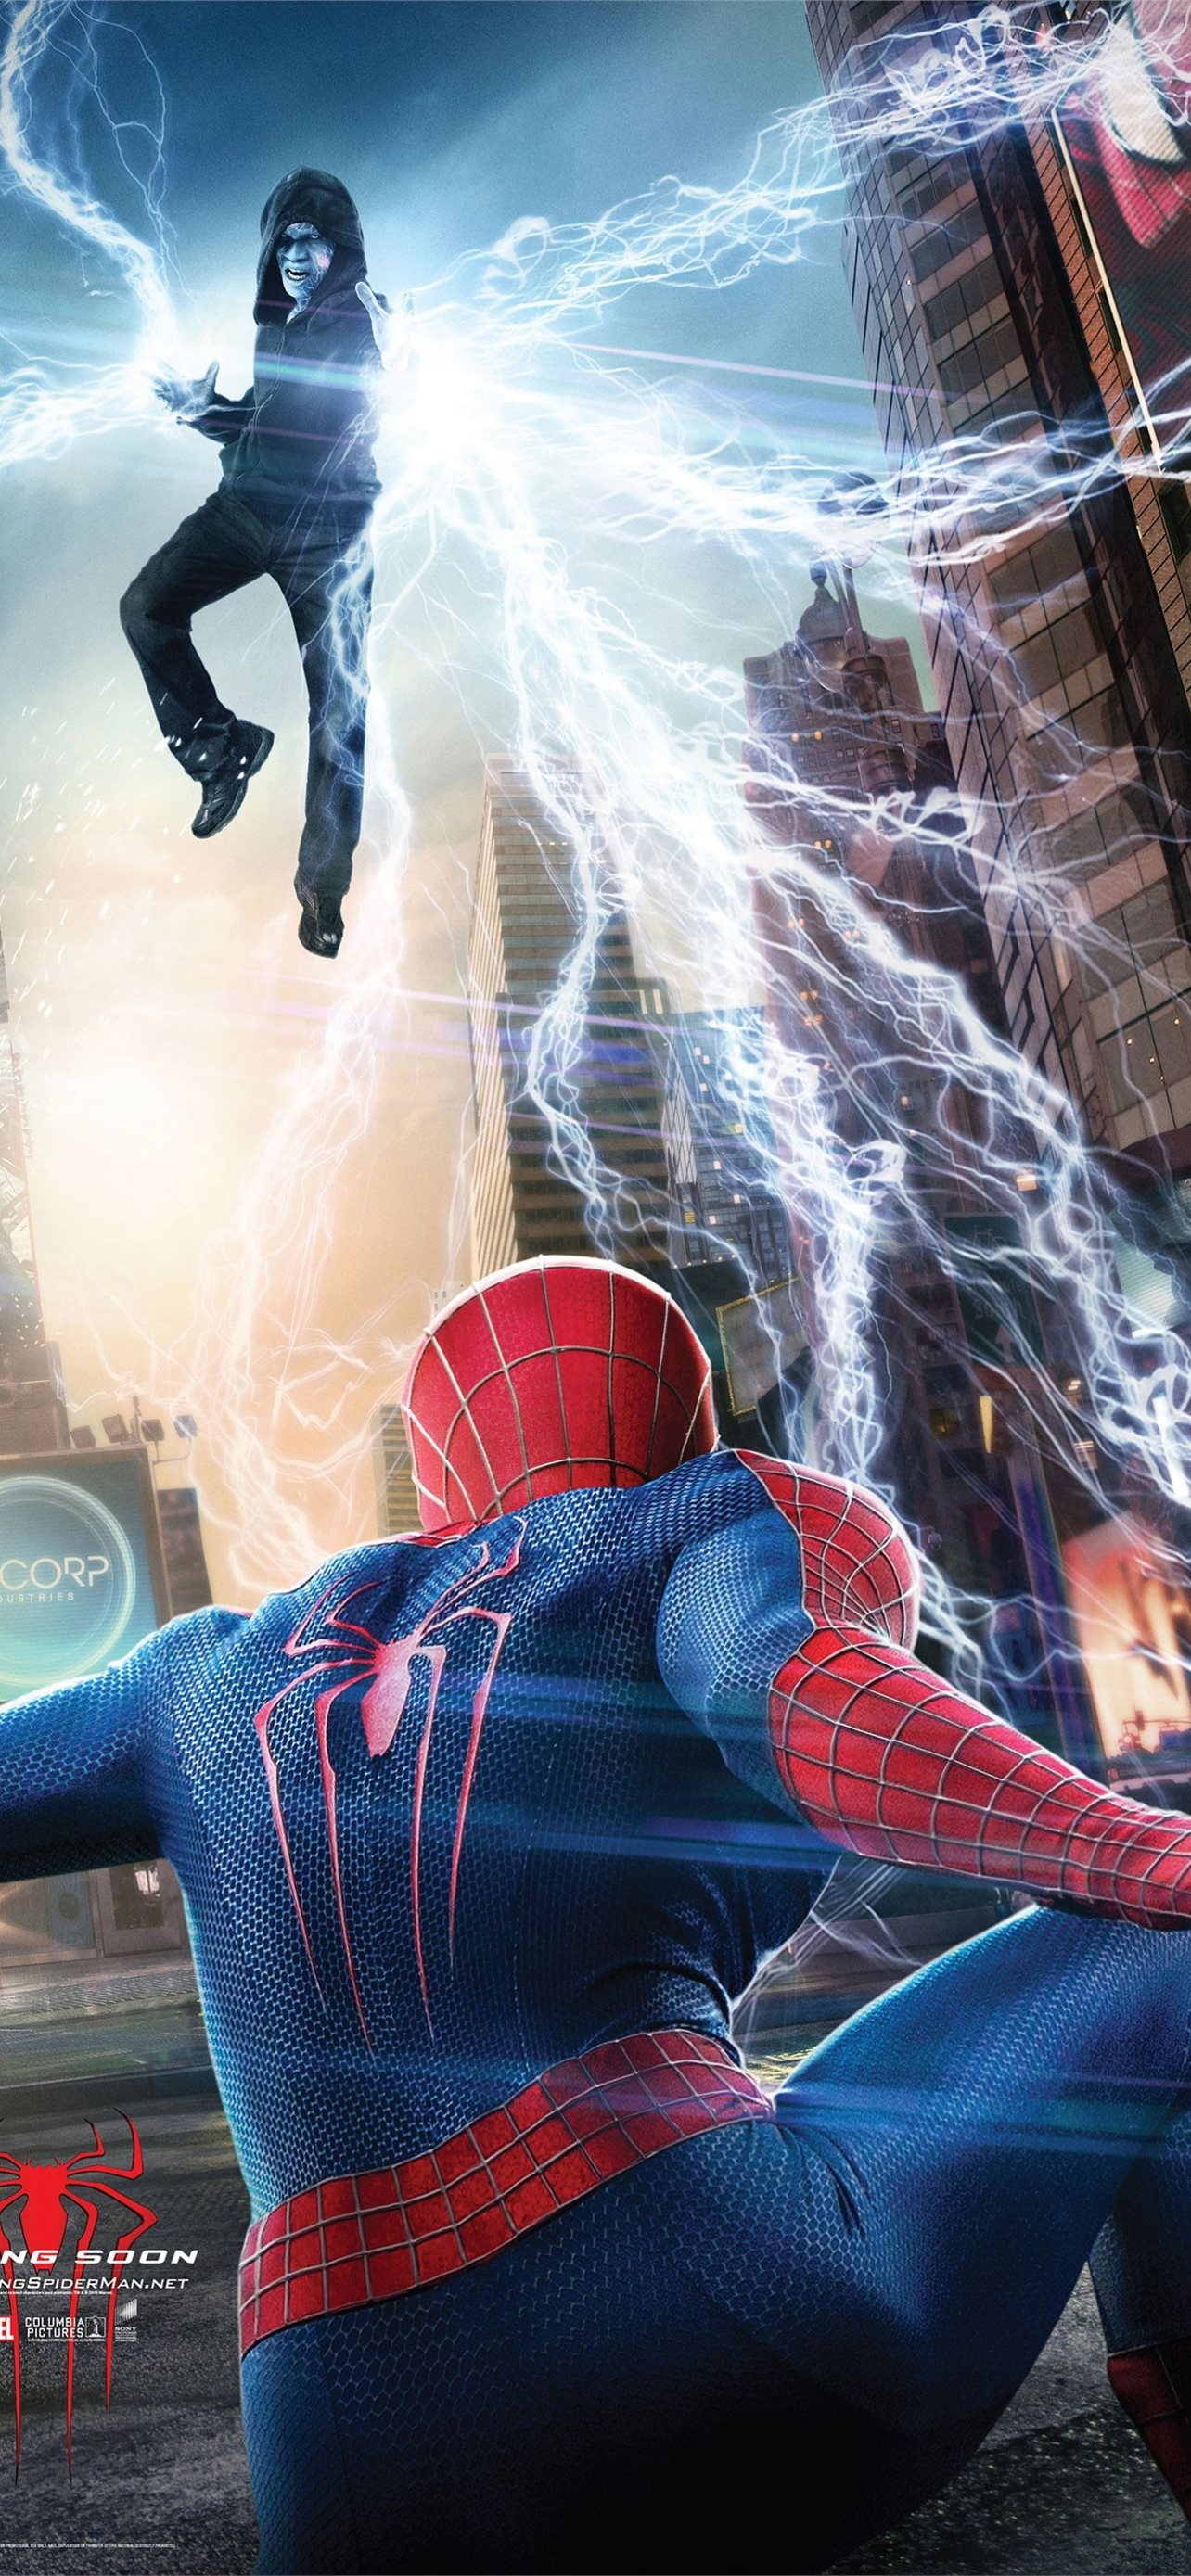 10 The Amazing SpiderMan HD Wallpapers and Backgrounds